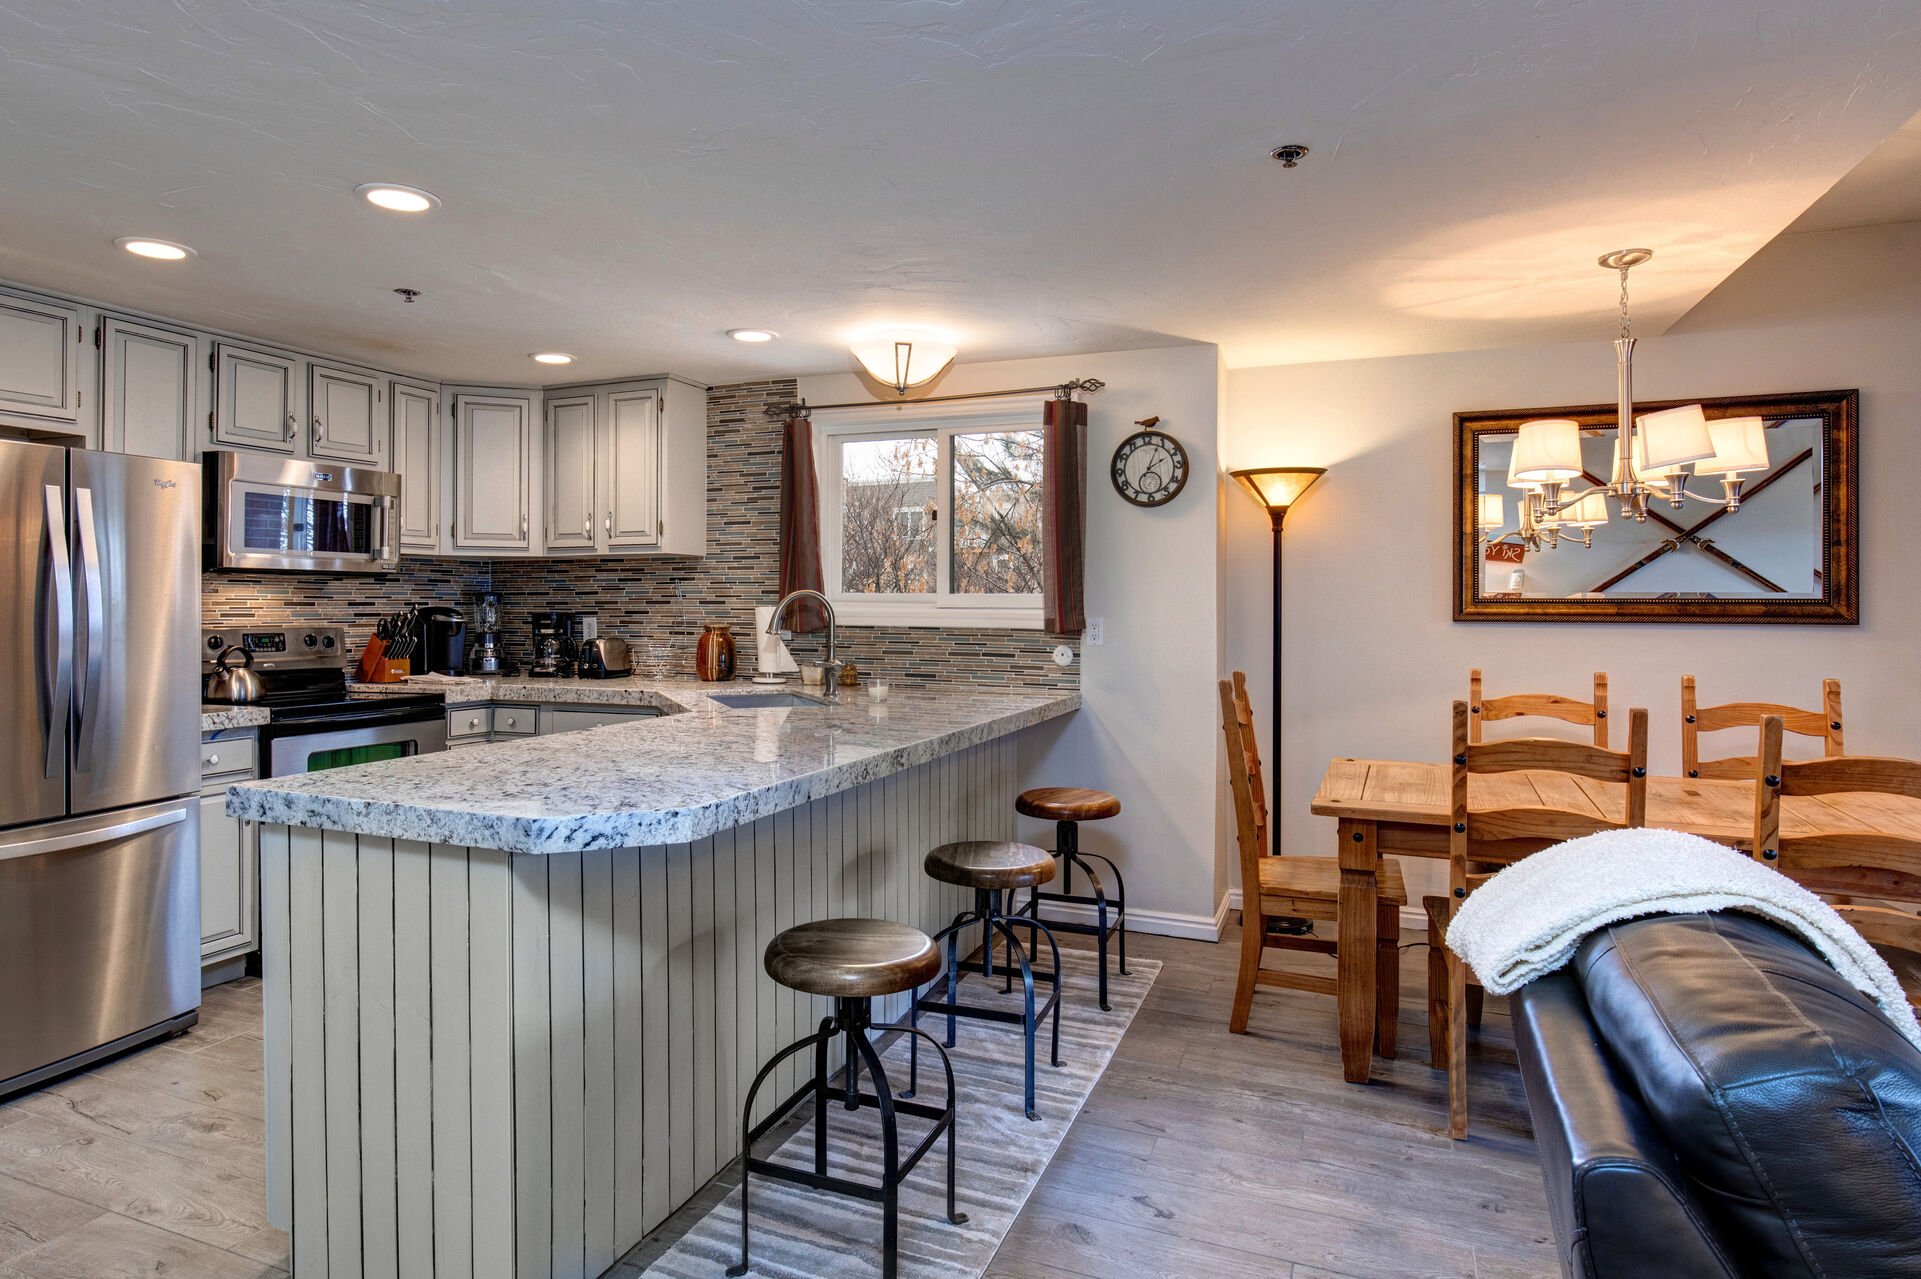 Fully Equipped Kitchen with Granite Counters, and Stainless Steel Appliances